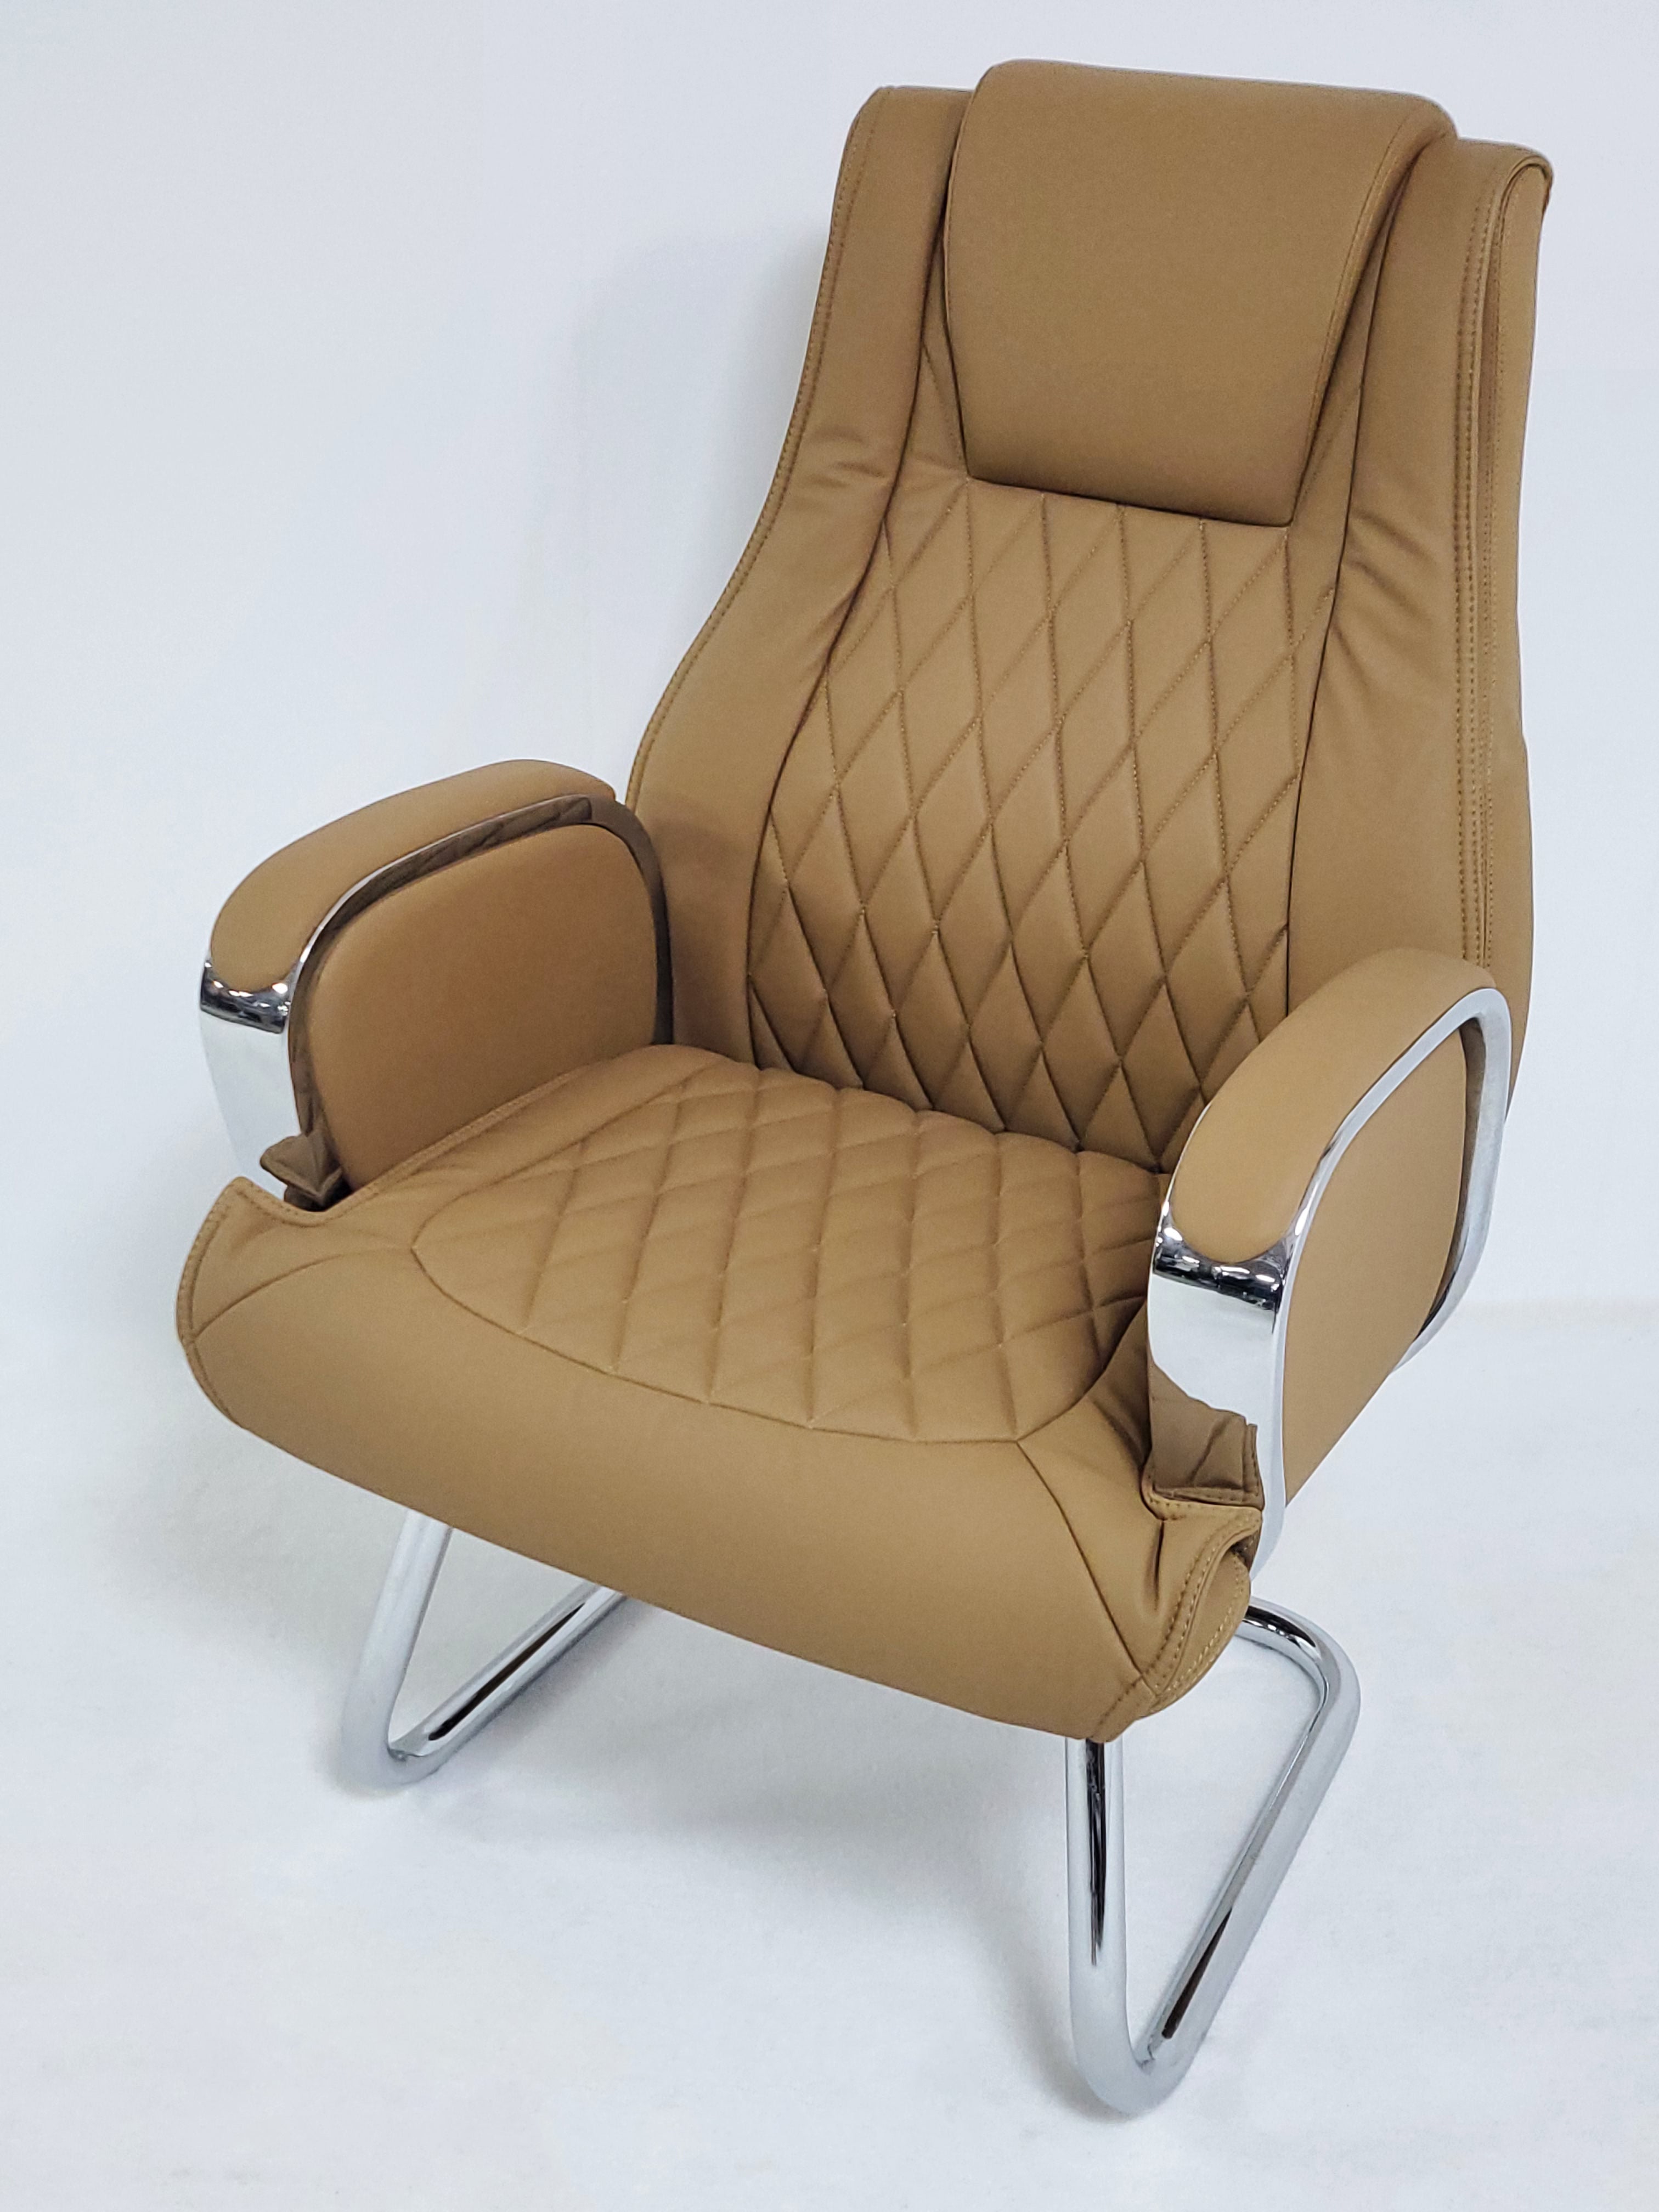 Heavy Duty Modern Beige Leather Visitor Chair with Chrome Arms - CHA-1202C UK